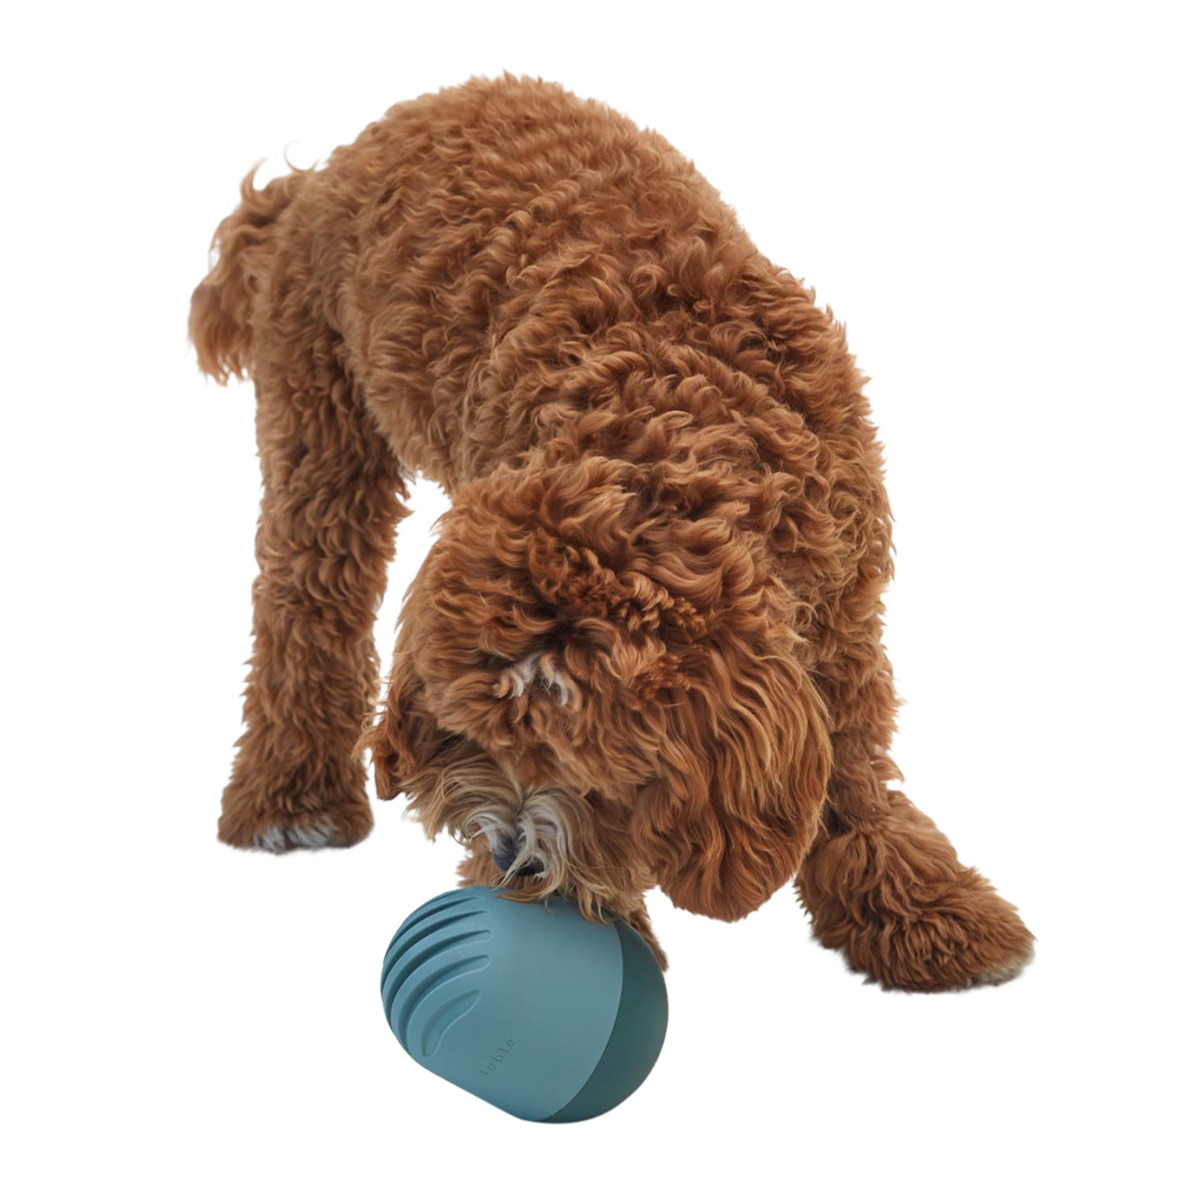 Fable Pets The Game Dog Toy, Navy